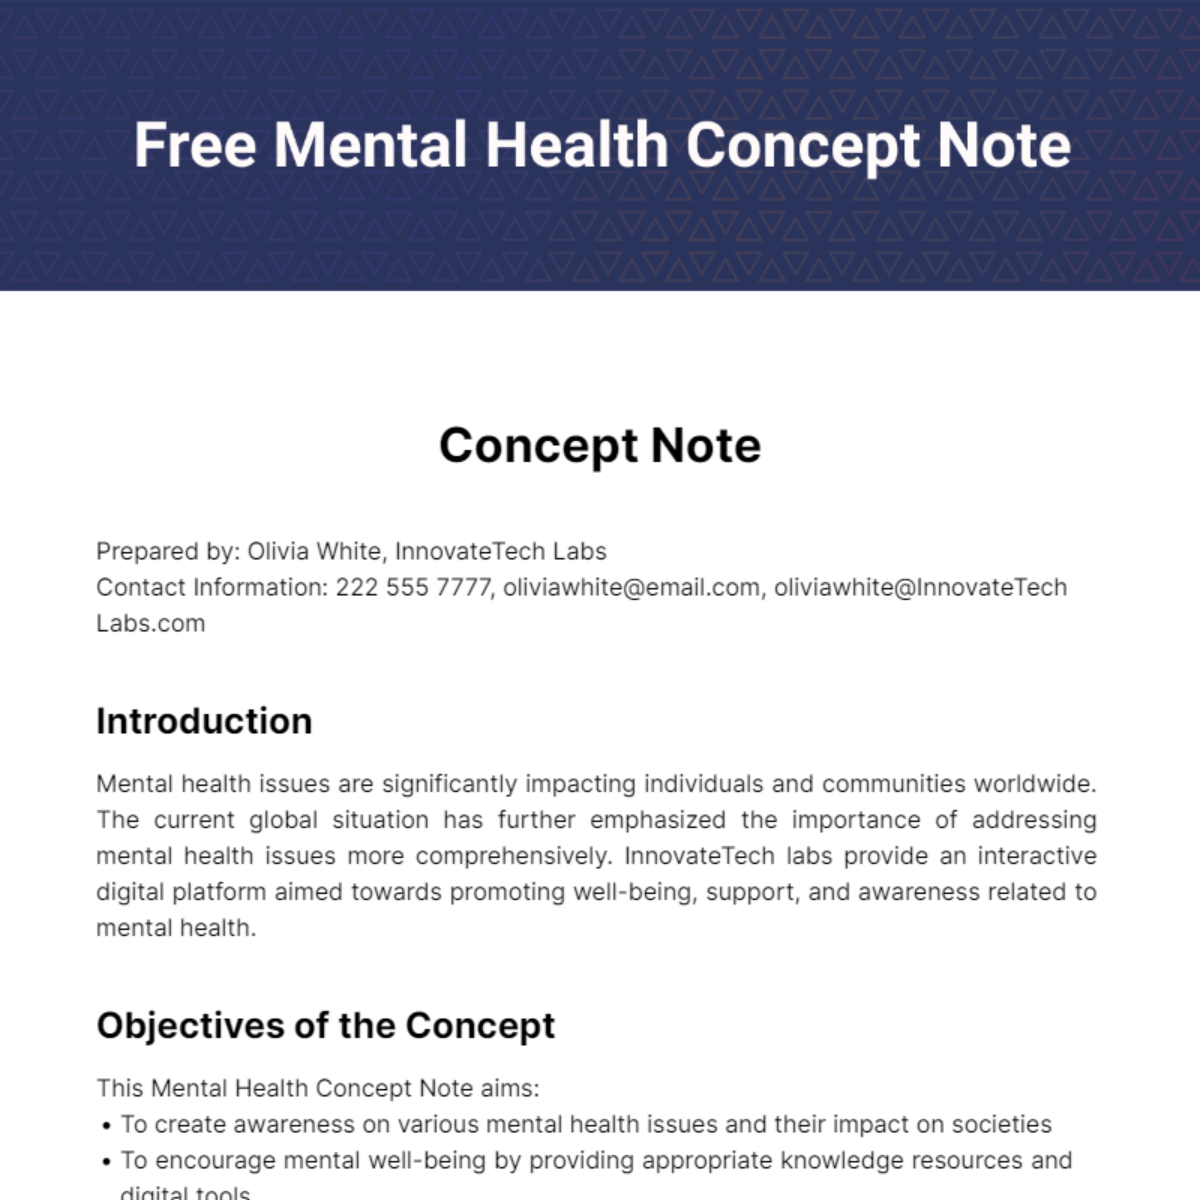 Free Mental Health Concept Note Template